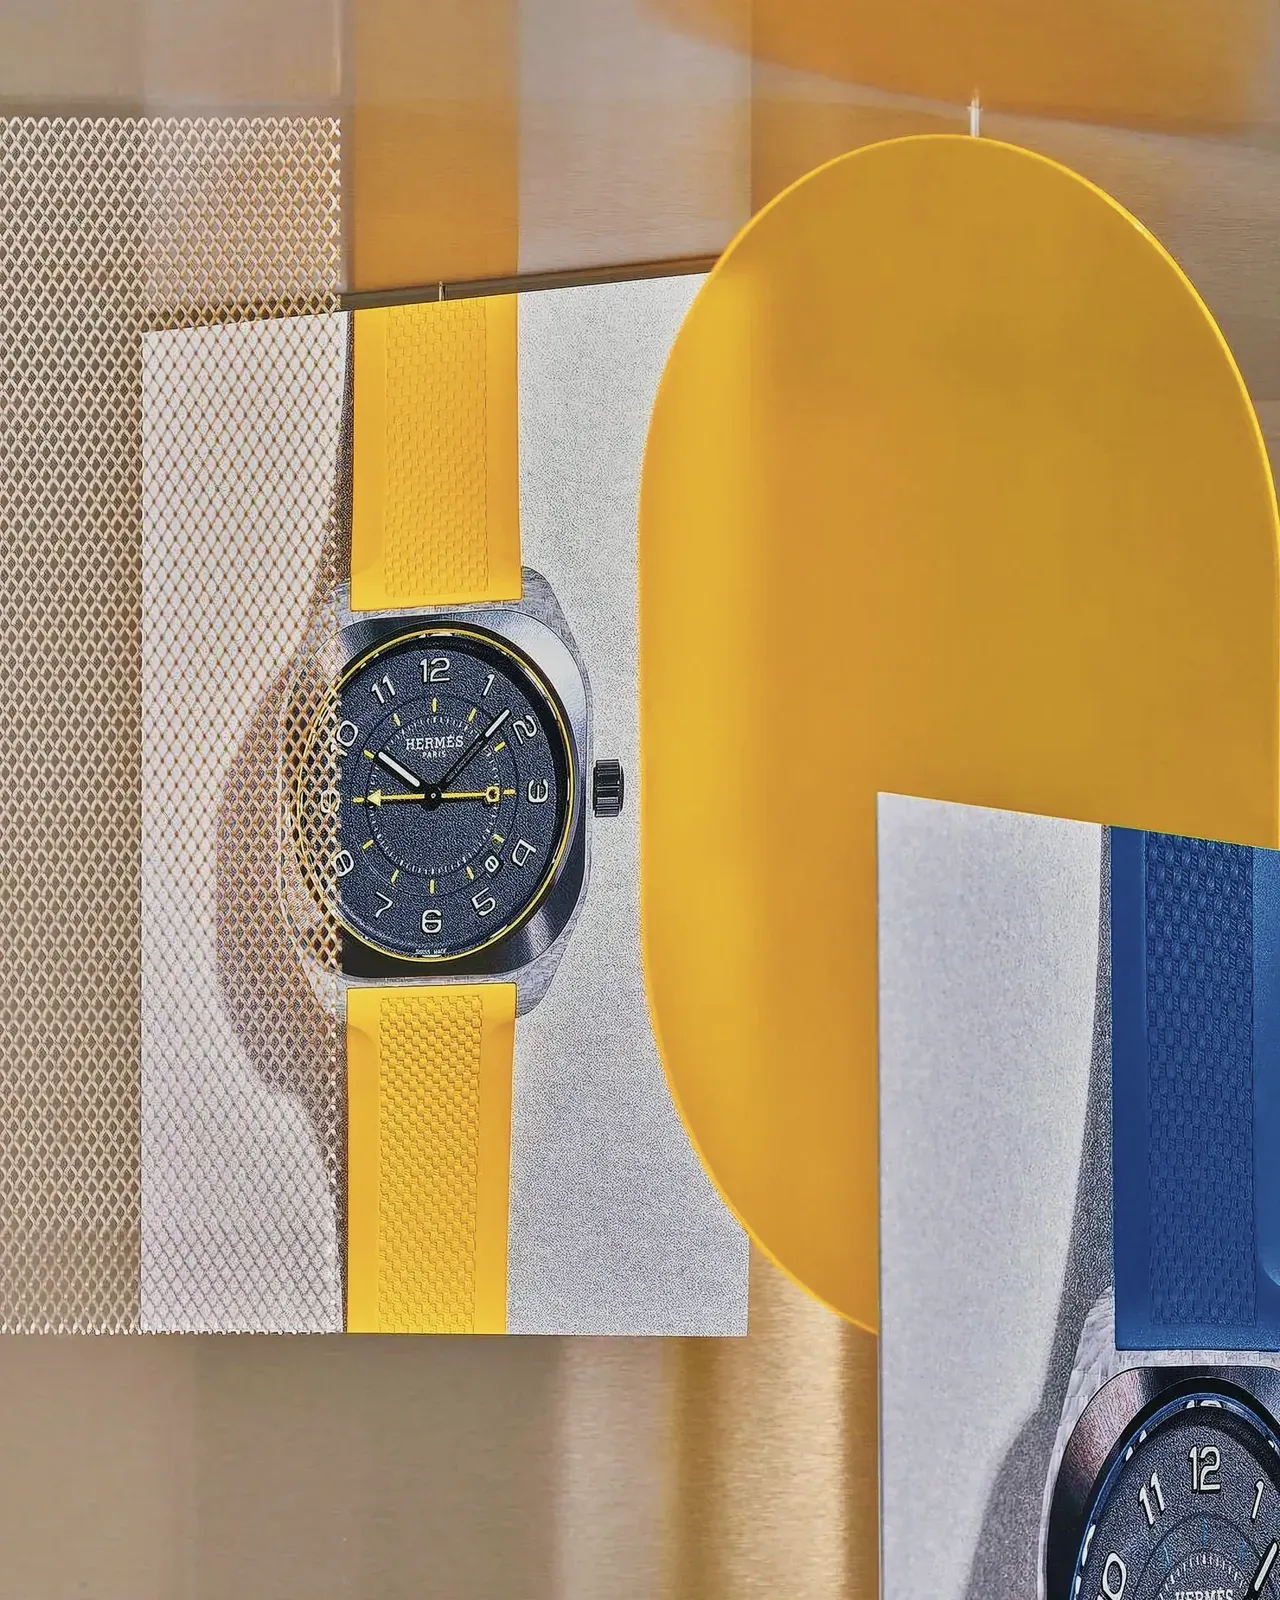 Close-up view of a stylish Hermès H08 wristwatch on a dual-colored surface.